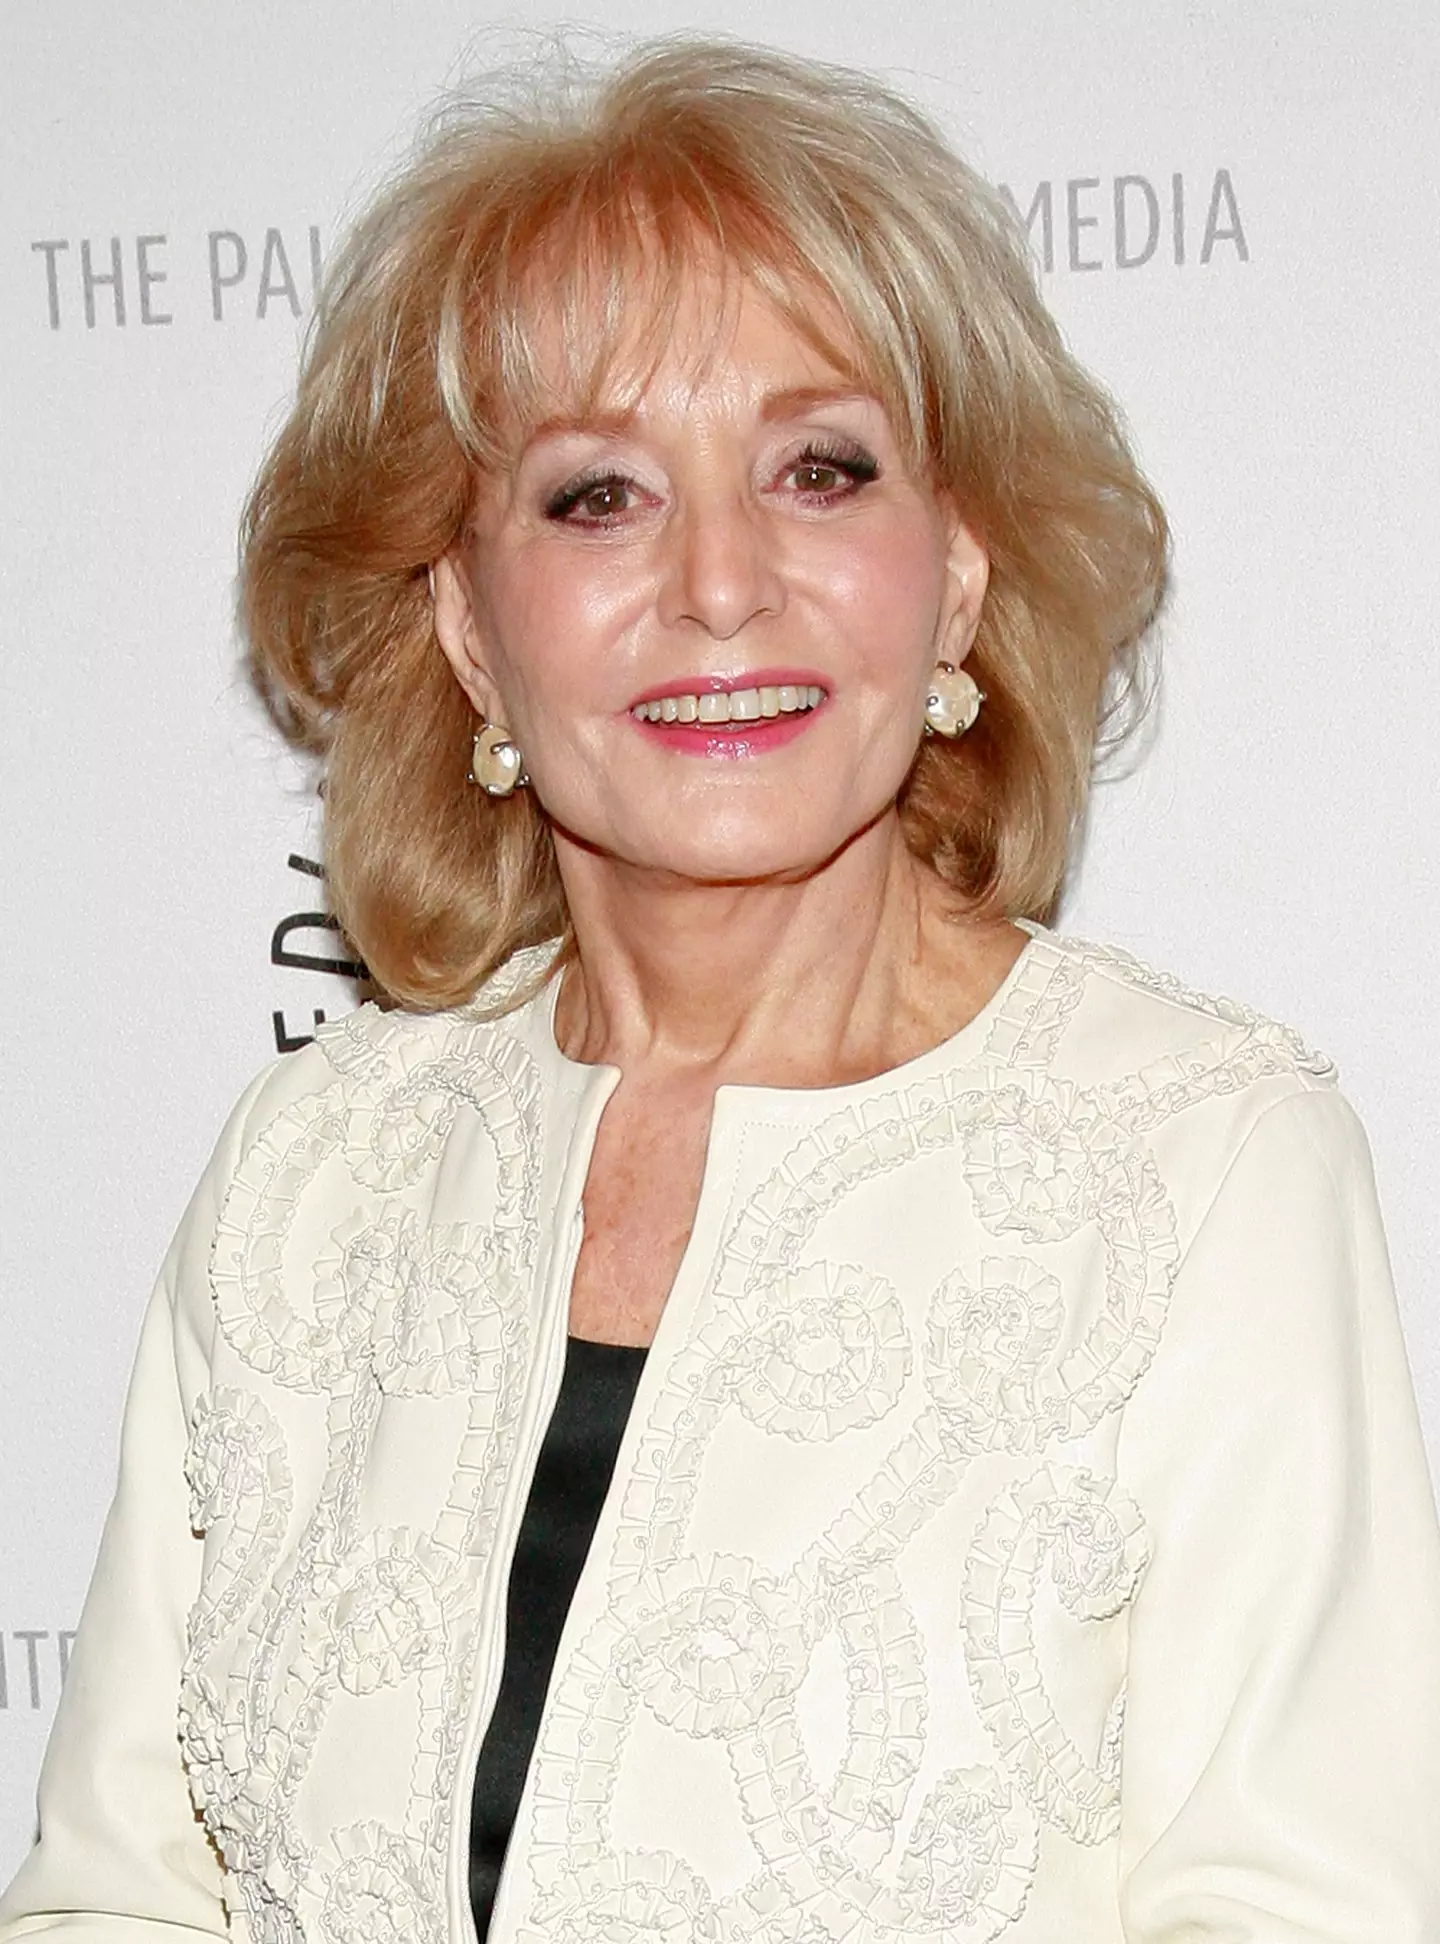 Barbara Walters hosted The View from 1997 to 2014.